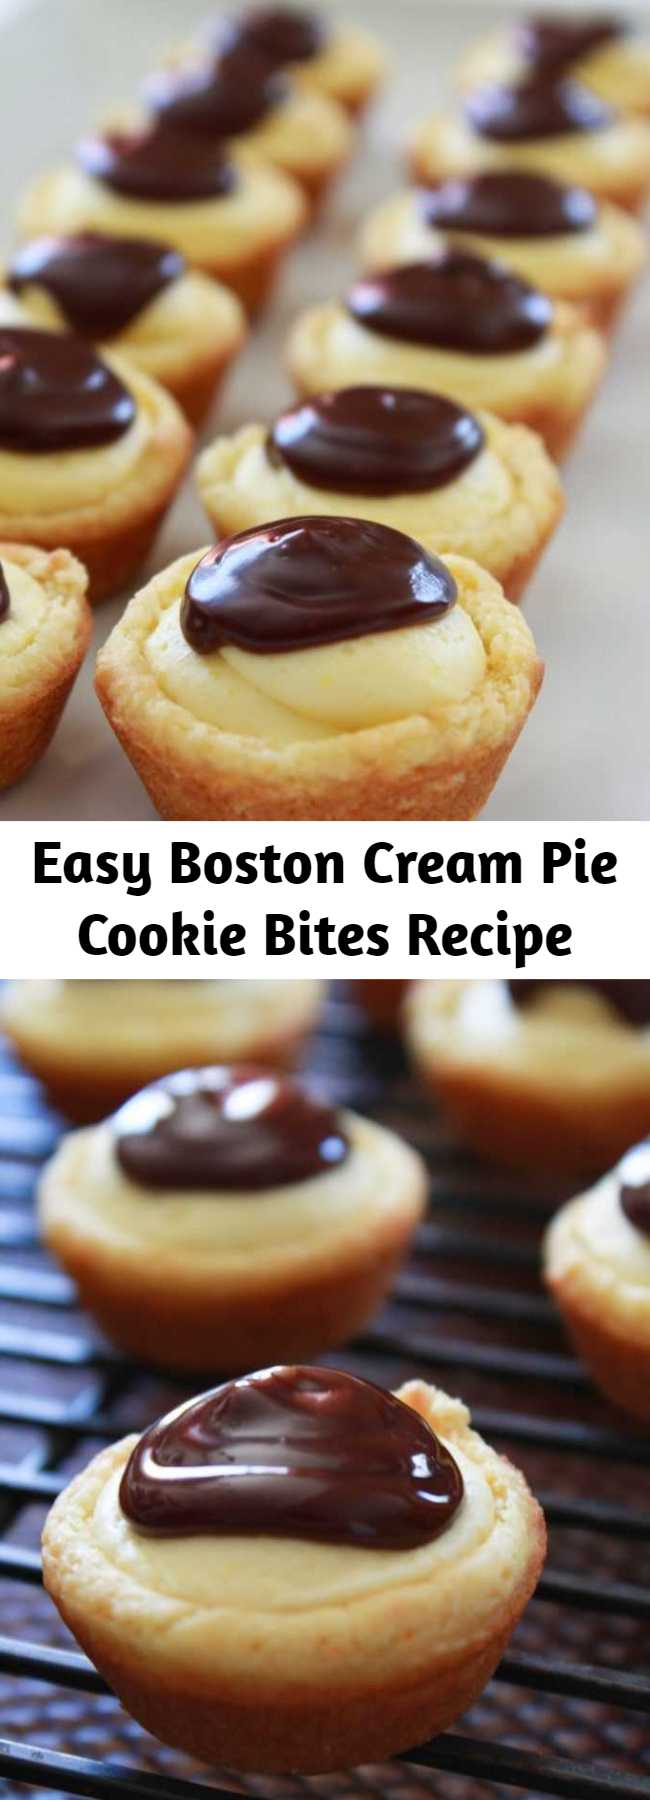 Easy Boston Cream Pie Cookie Bites Recipe - All of the awesome flavors you love from the traditional Boston Cream Pie are turned into a cookie cup.  They are quick to make, starting with a cake mix and taste delicious.  Everyone will go crazy for these little cuties.